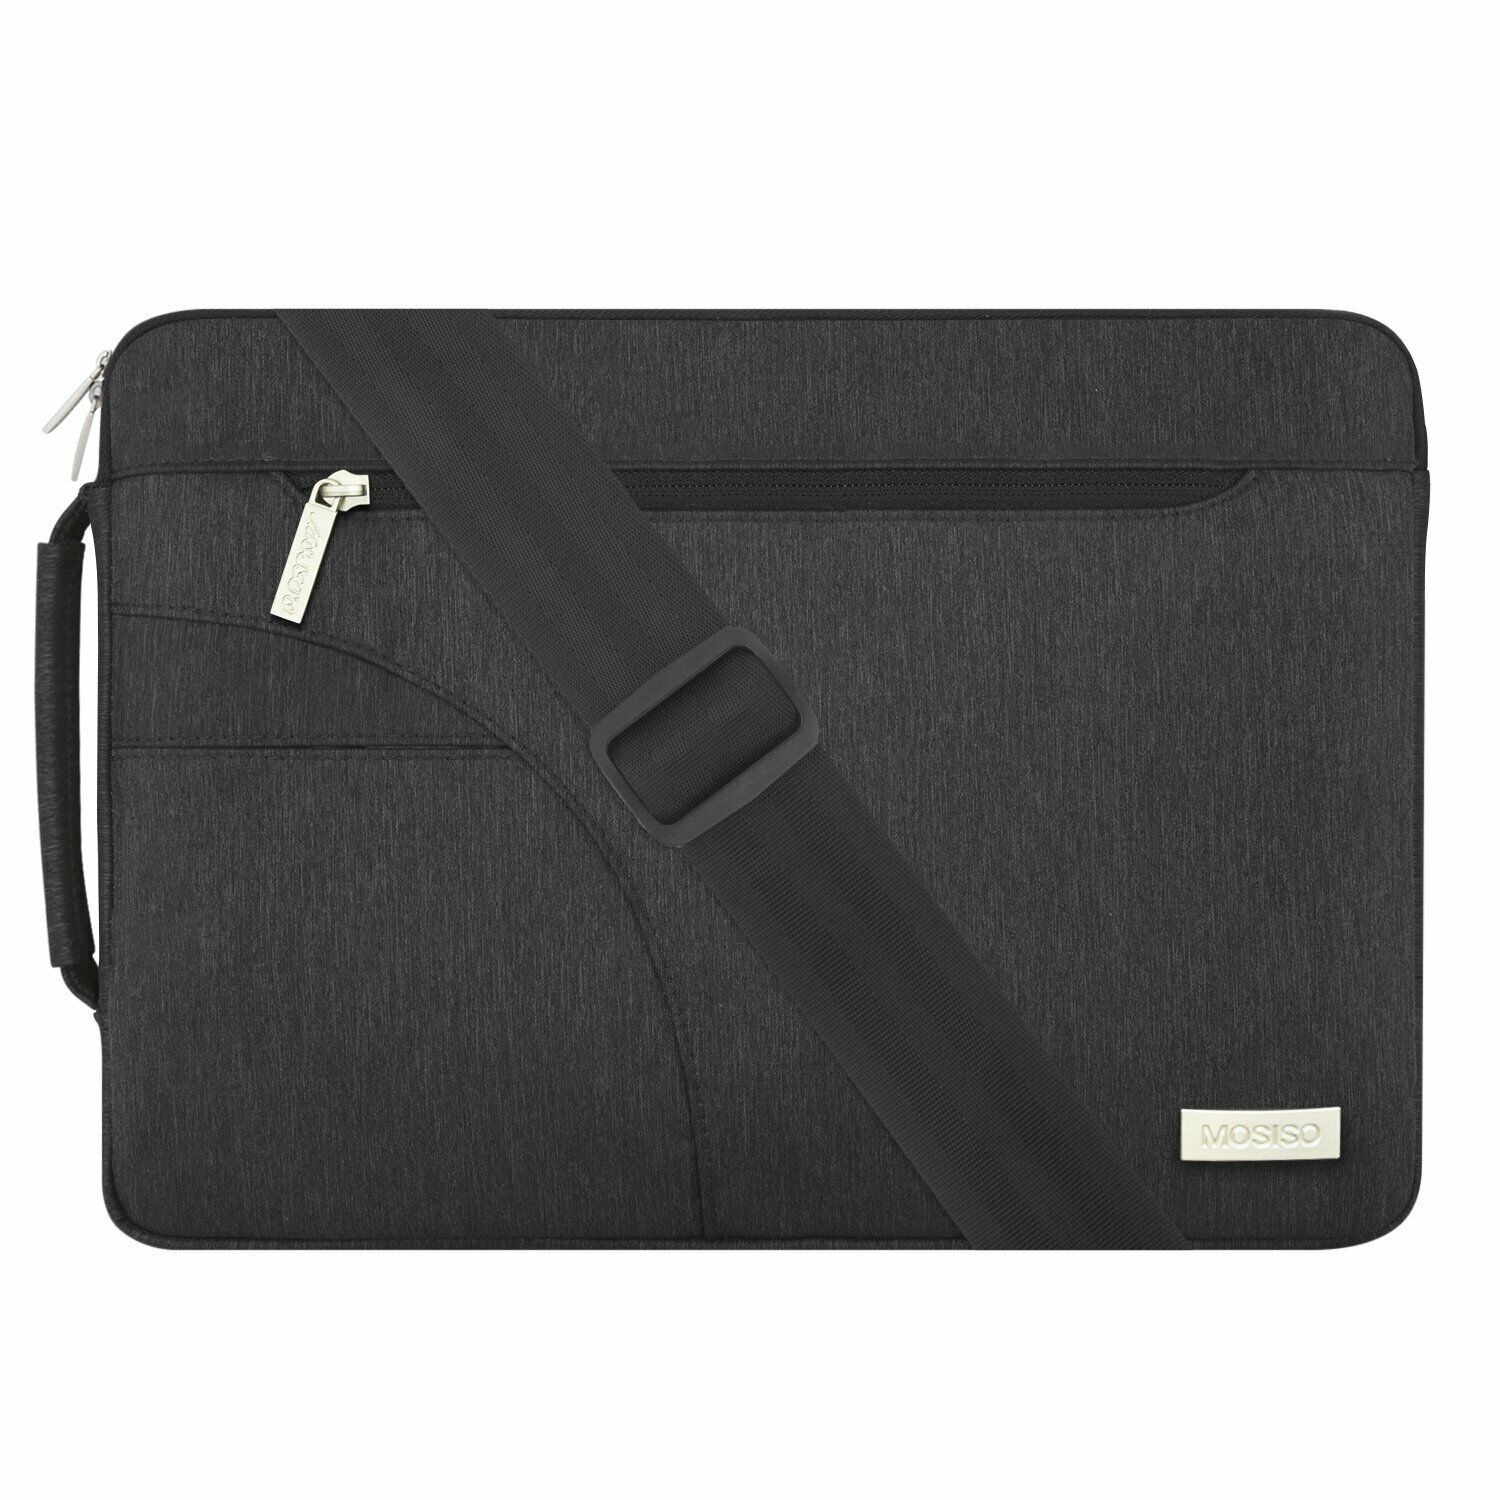 Mosiso 13.3 14 15.6 Laptop Messenger Bag Carry Case for Macbook Air Pro 13 15 